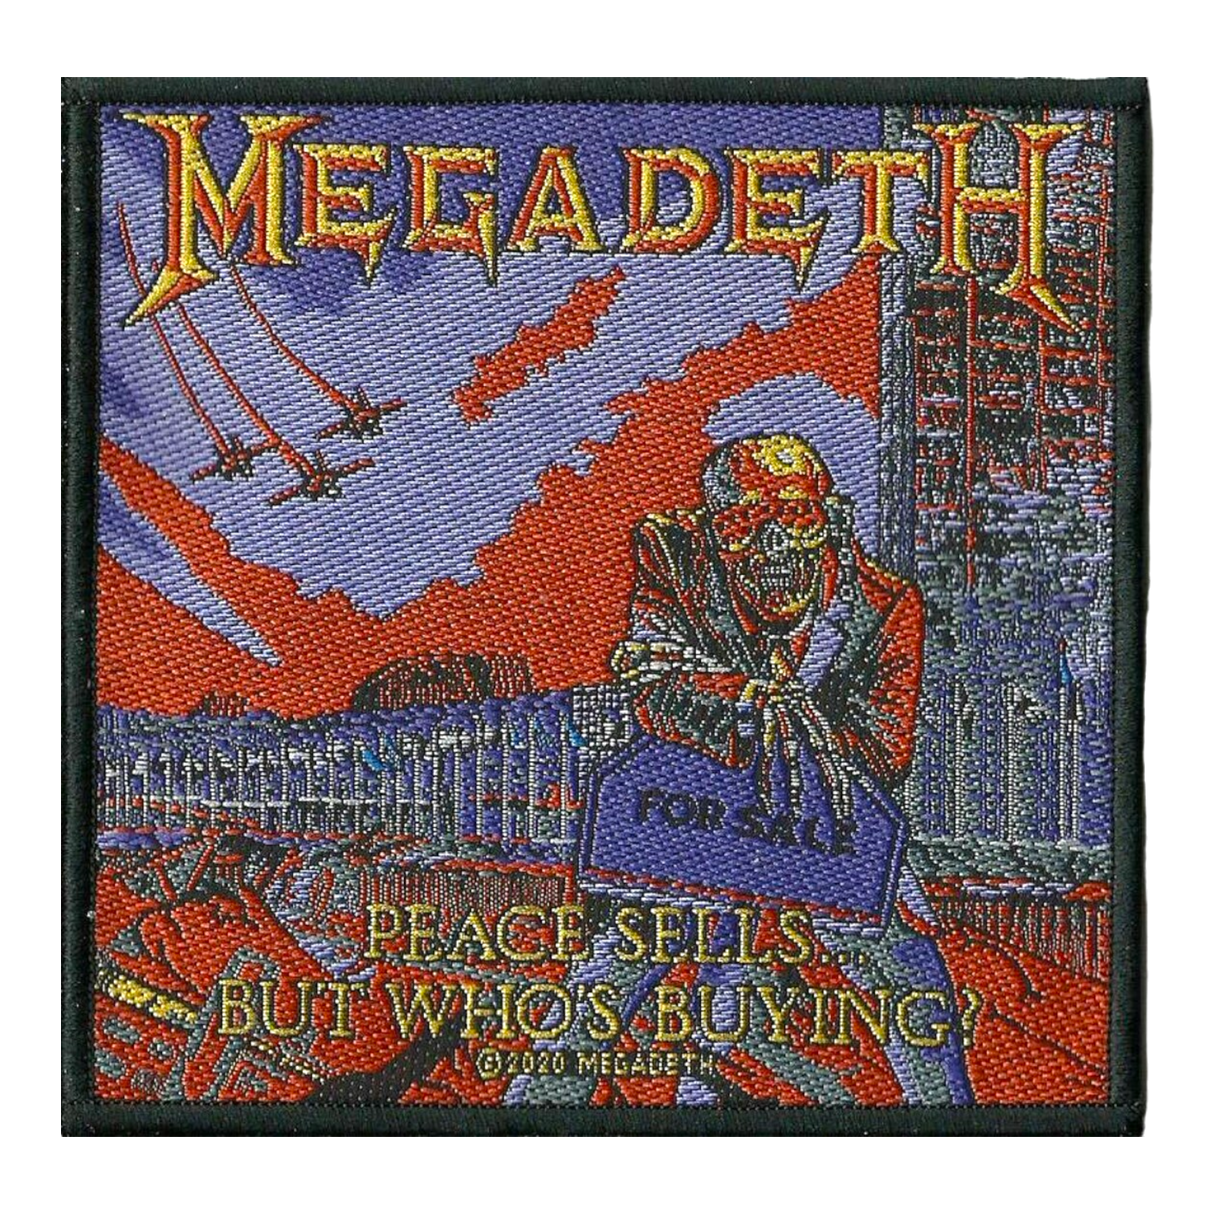 Patch Megadeth - Peace Sells...